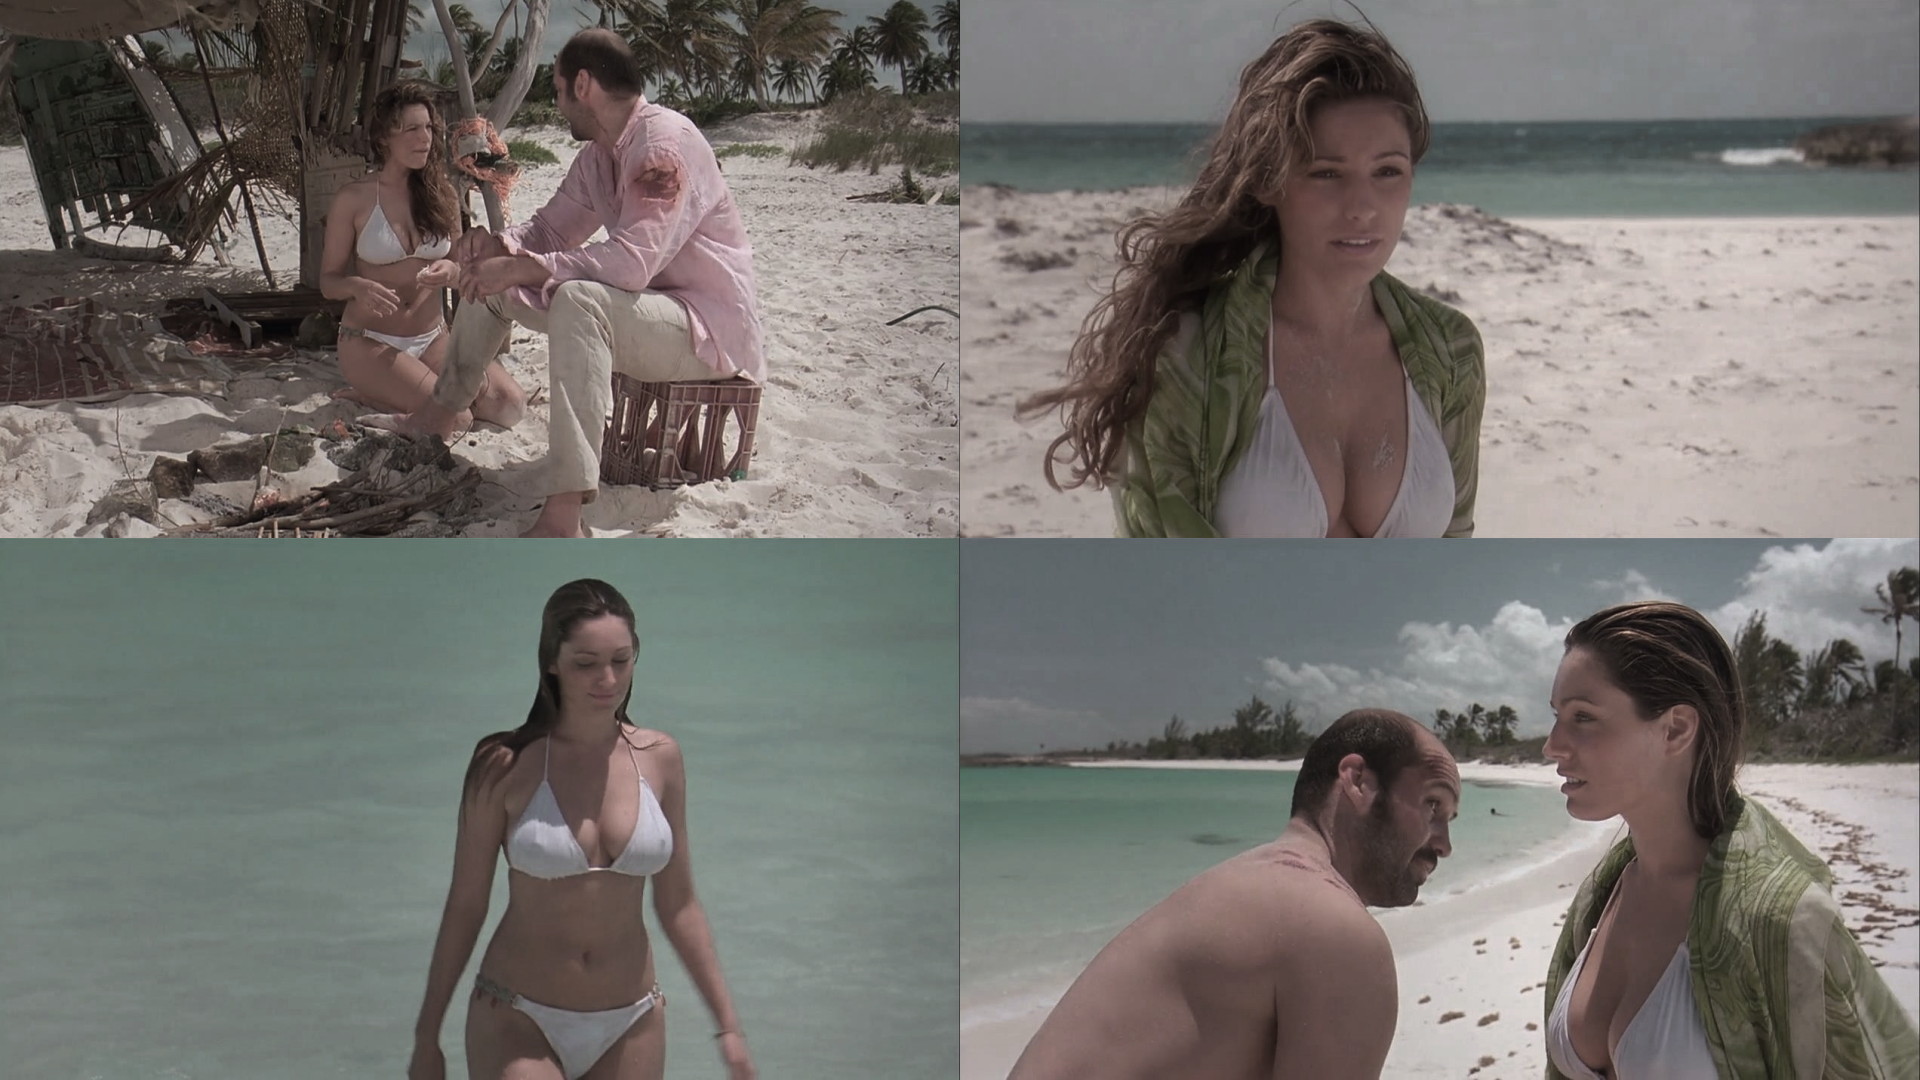 Kelly brook survival island getting best adult free compilation